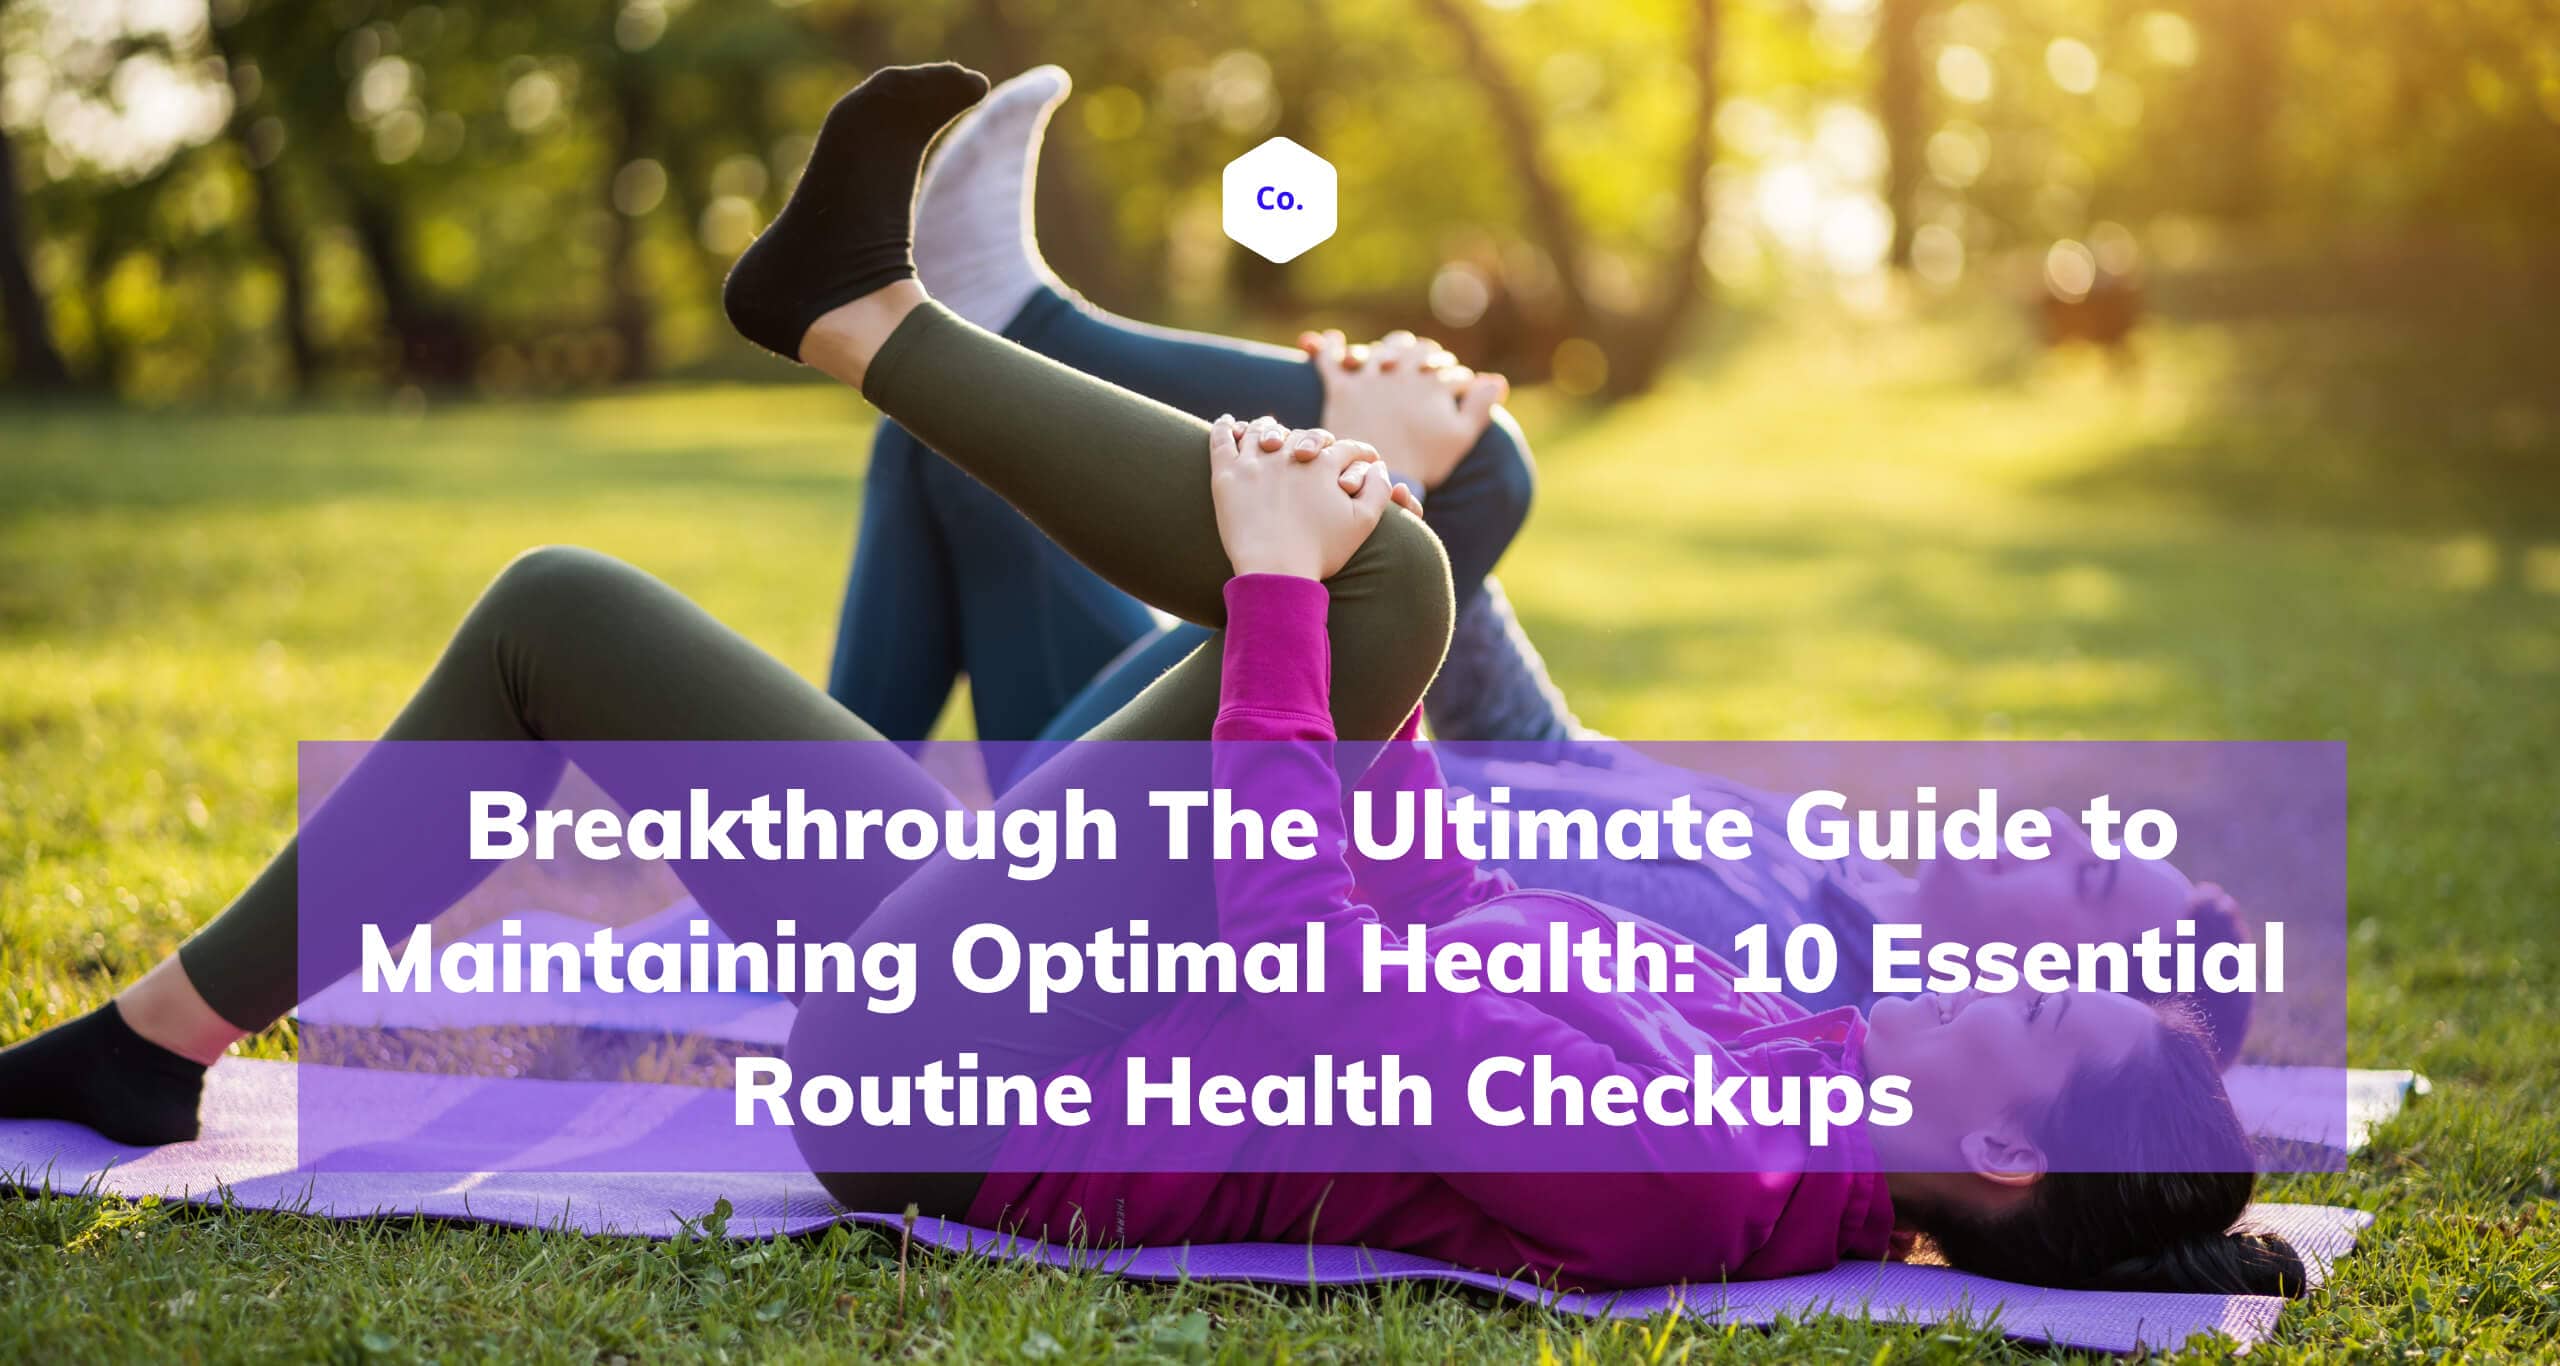 The Ultimate Guide to Maintaining Optimal Health 10 Essential Checkups